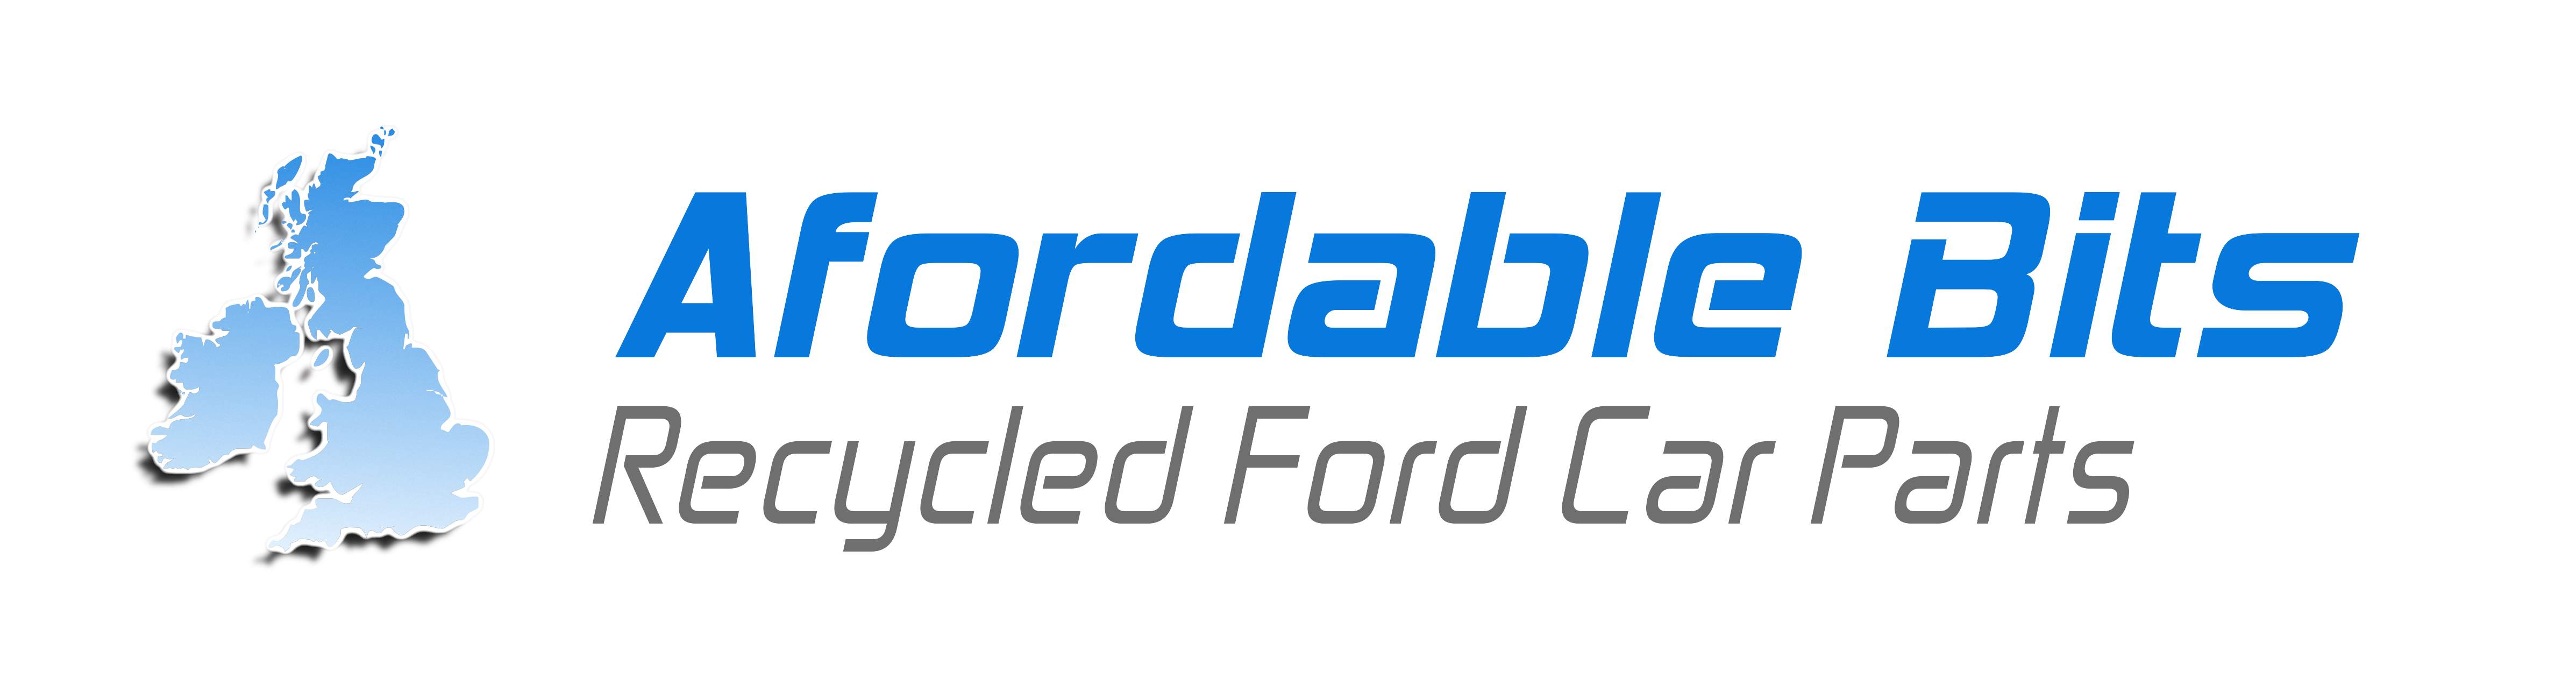 Afordable Bits | Used Ford Car Parts